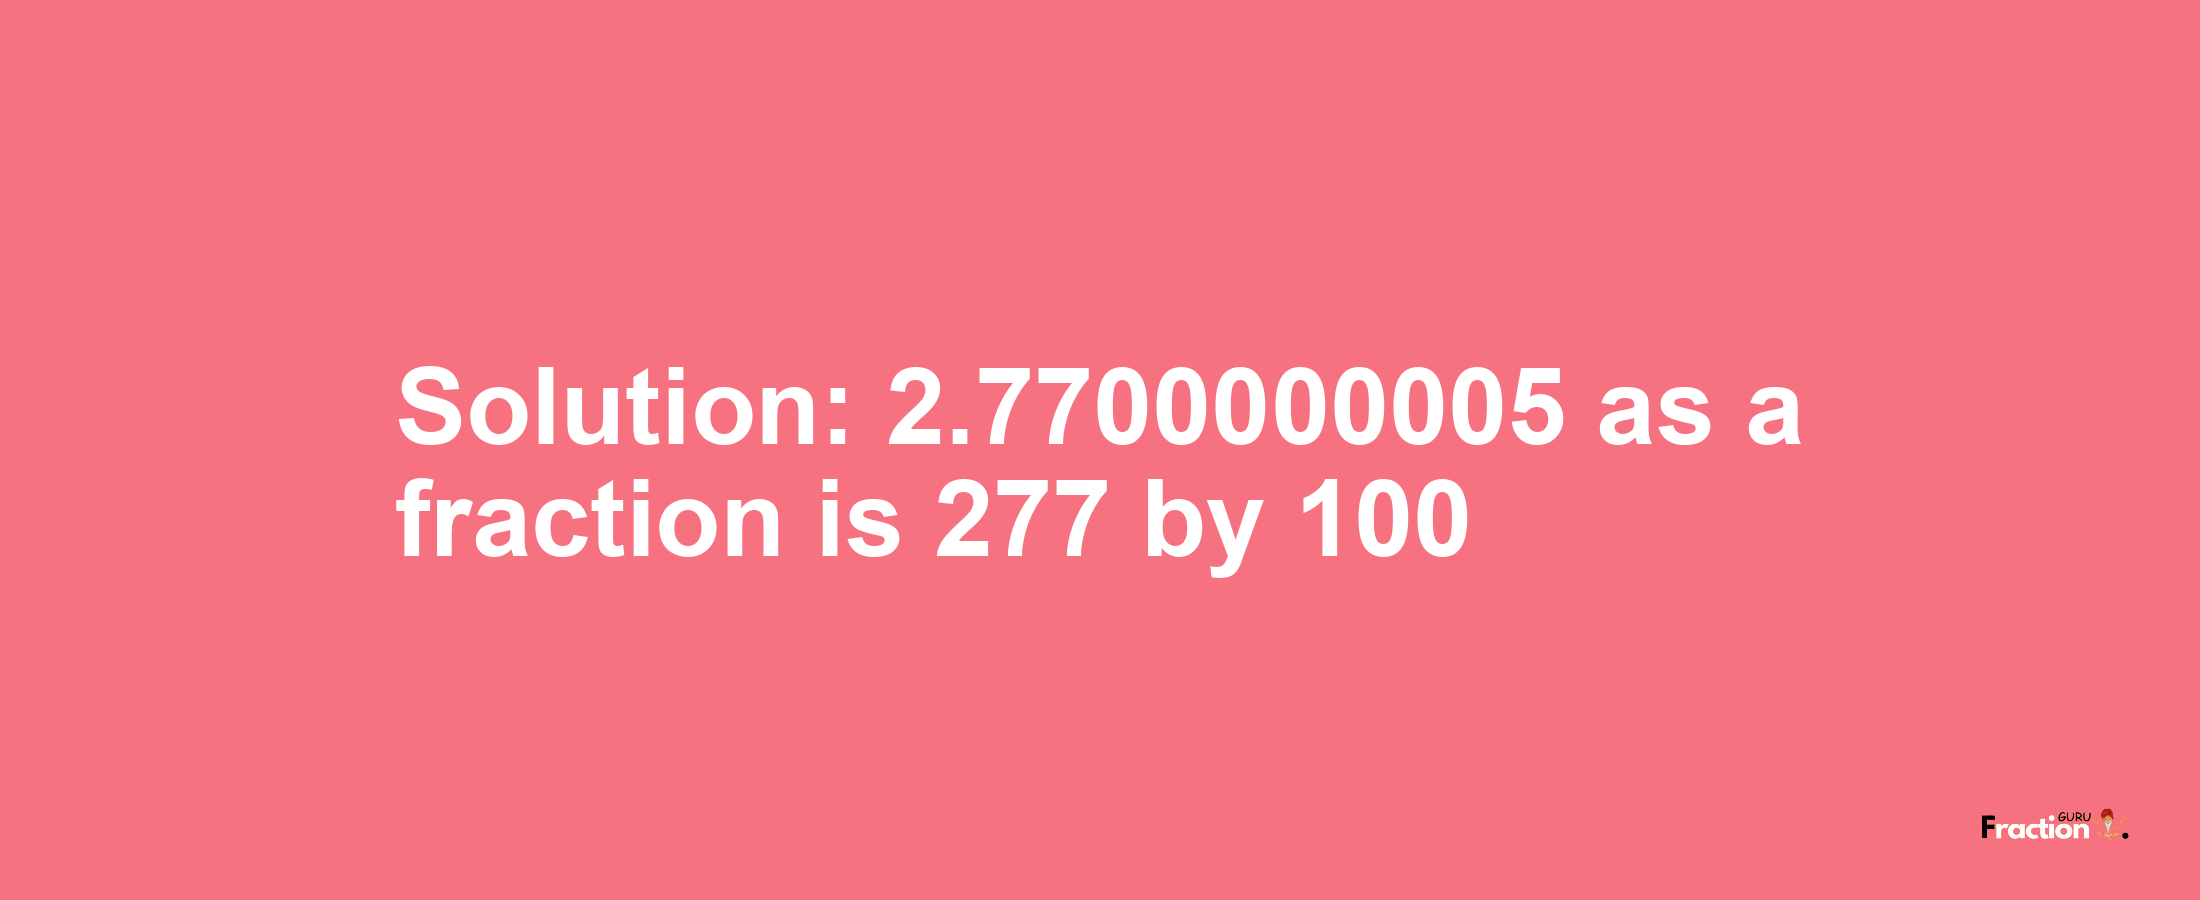 Solution:2.7700000005 as a fraction is 277/100